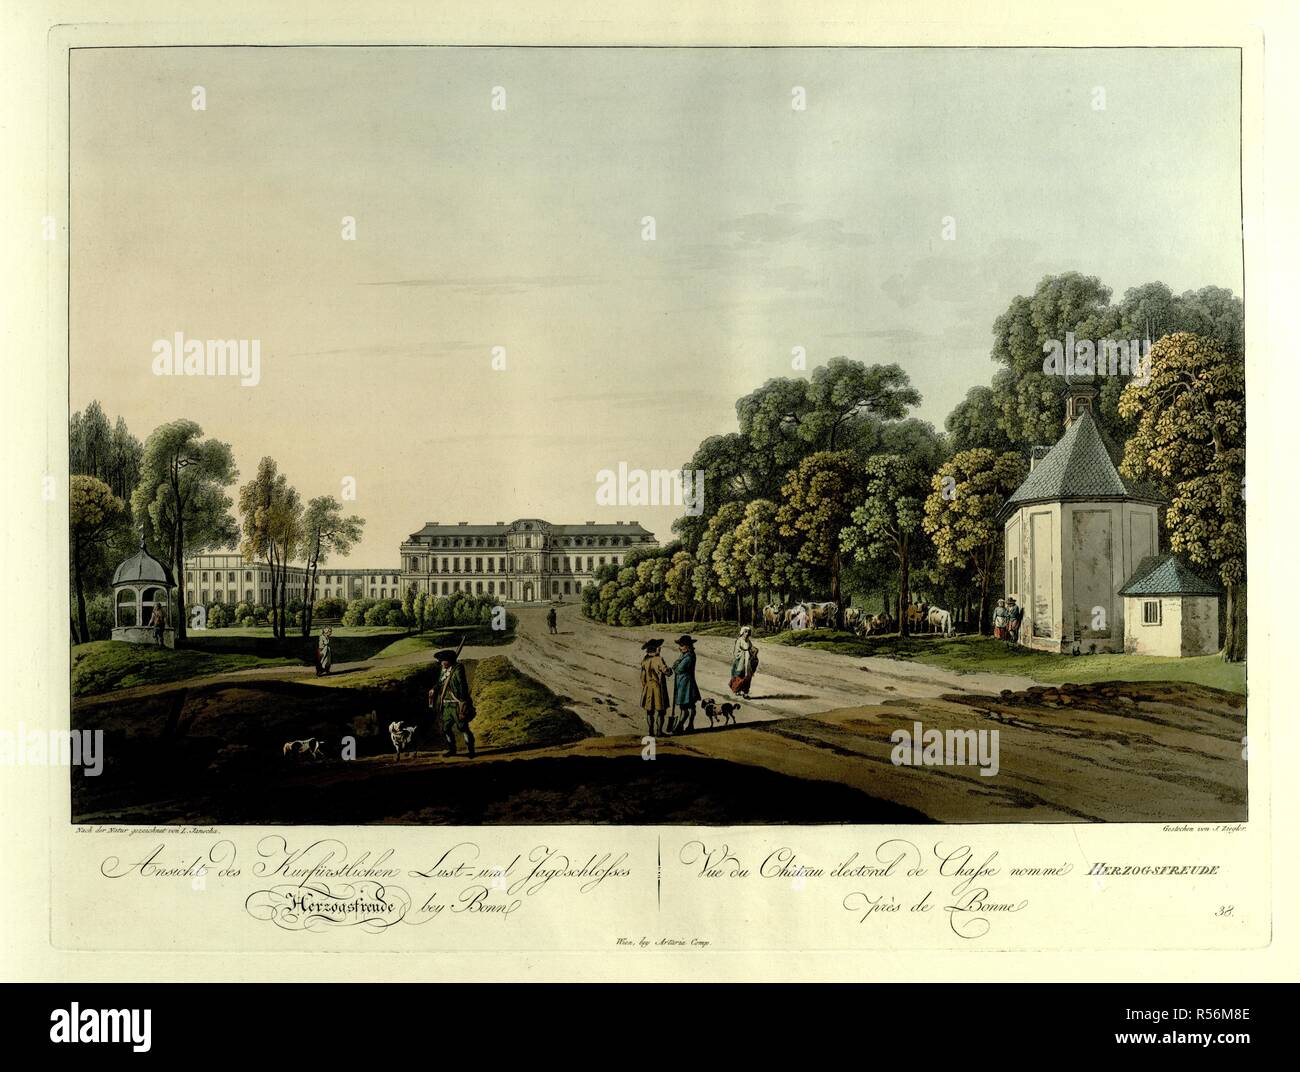 A huntsman and his two hounds walk on a road near two gardeners standing in the foreground. A woman talking to a shepherd looking after a herd of cows beyond on the right, and a view of the hunting lodge of the Elector of Cologne and its surrounding grounds, or Kottenforst. Ansicht des KurfÃ¼rstlichen Lust und Jagdschlosses Herzogsfreude bey Bonn = Vue du ChÃ¢teau Ã©lectoral de Chasse nommÃ© HERZOGSFREUDE prÃ¨s de Bonne. Wien : bey Artaria Comp., [1798]. hand-coloured etching. Source: Maps 6.Tab.12, plate 43. Language: German and French. Author: Ziegler, J. Stock Photo